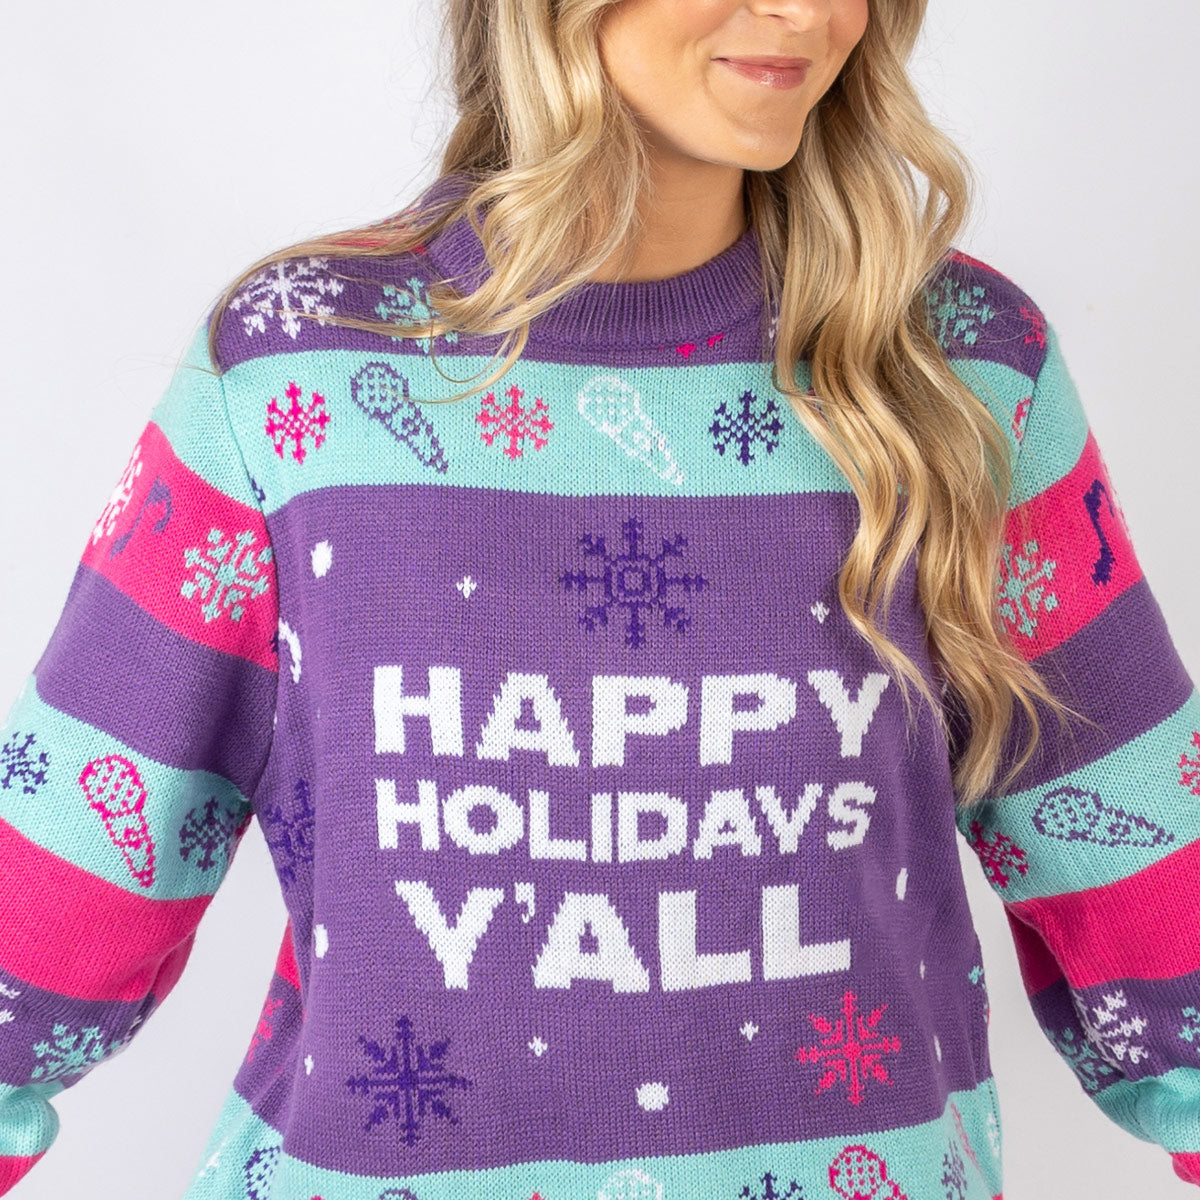 Model wearing a custom cozy cashmere Christmas sweater with a 'Happy Holidays Y'all' design in purple, pink, teal, and white colors. The sweater features holiday motifs including snowflakes, musical notes, and festive decorations.